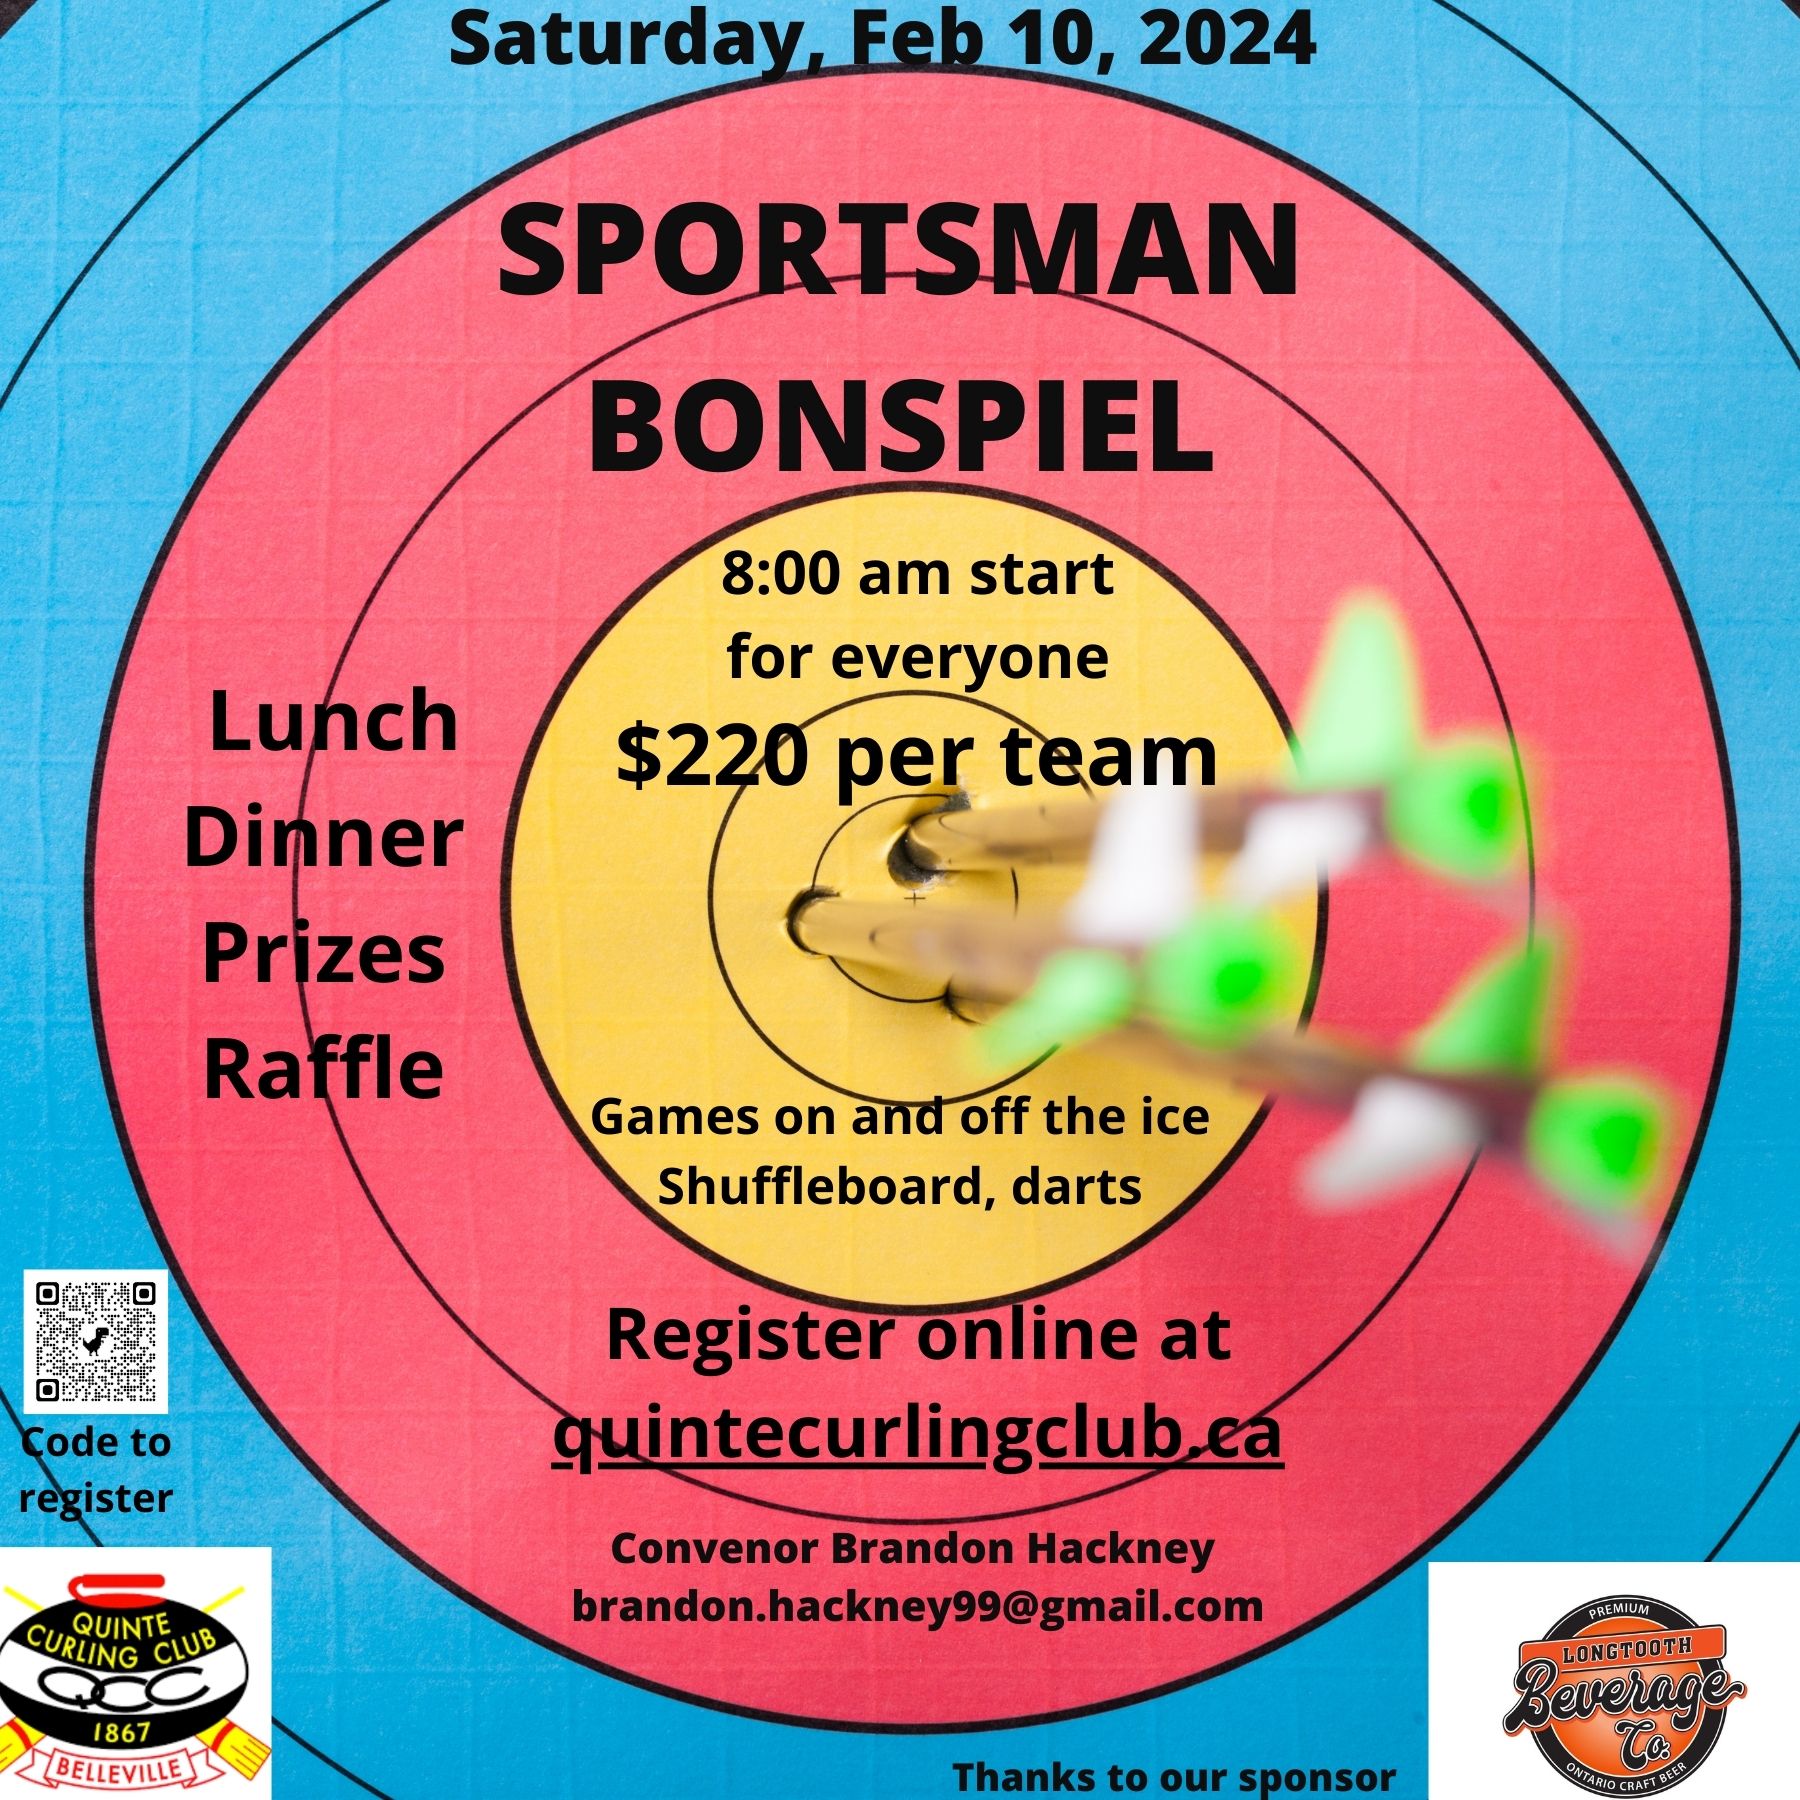 picture of dartboard with logos of Longtooth Brewery and Quinte Curling on it. Also has event details and title "Sportman Bonspiel"